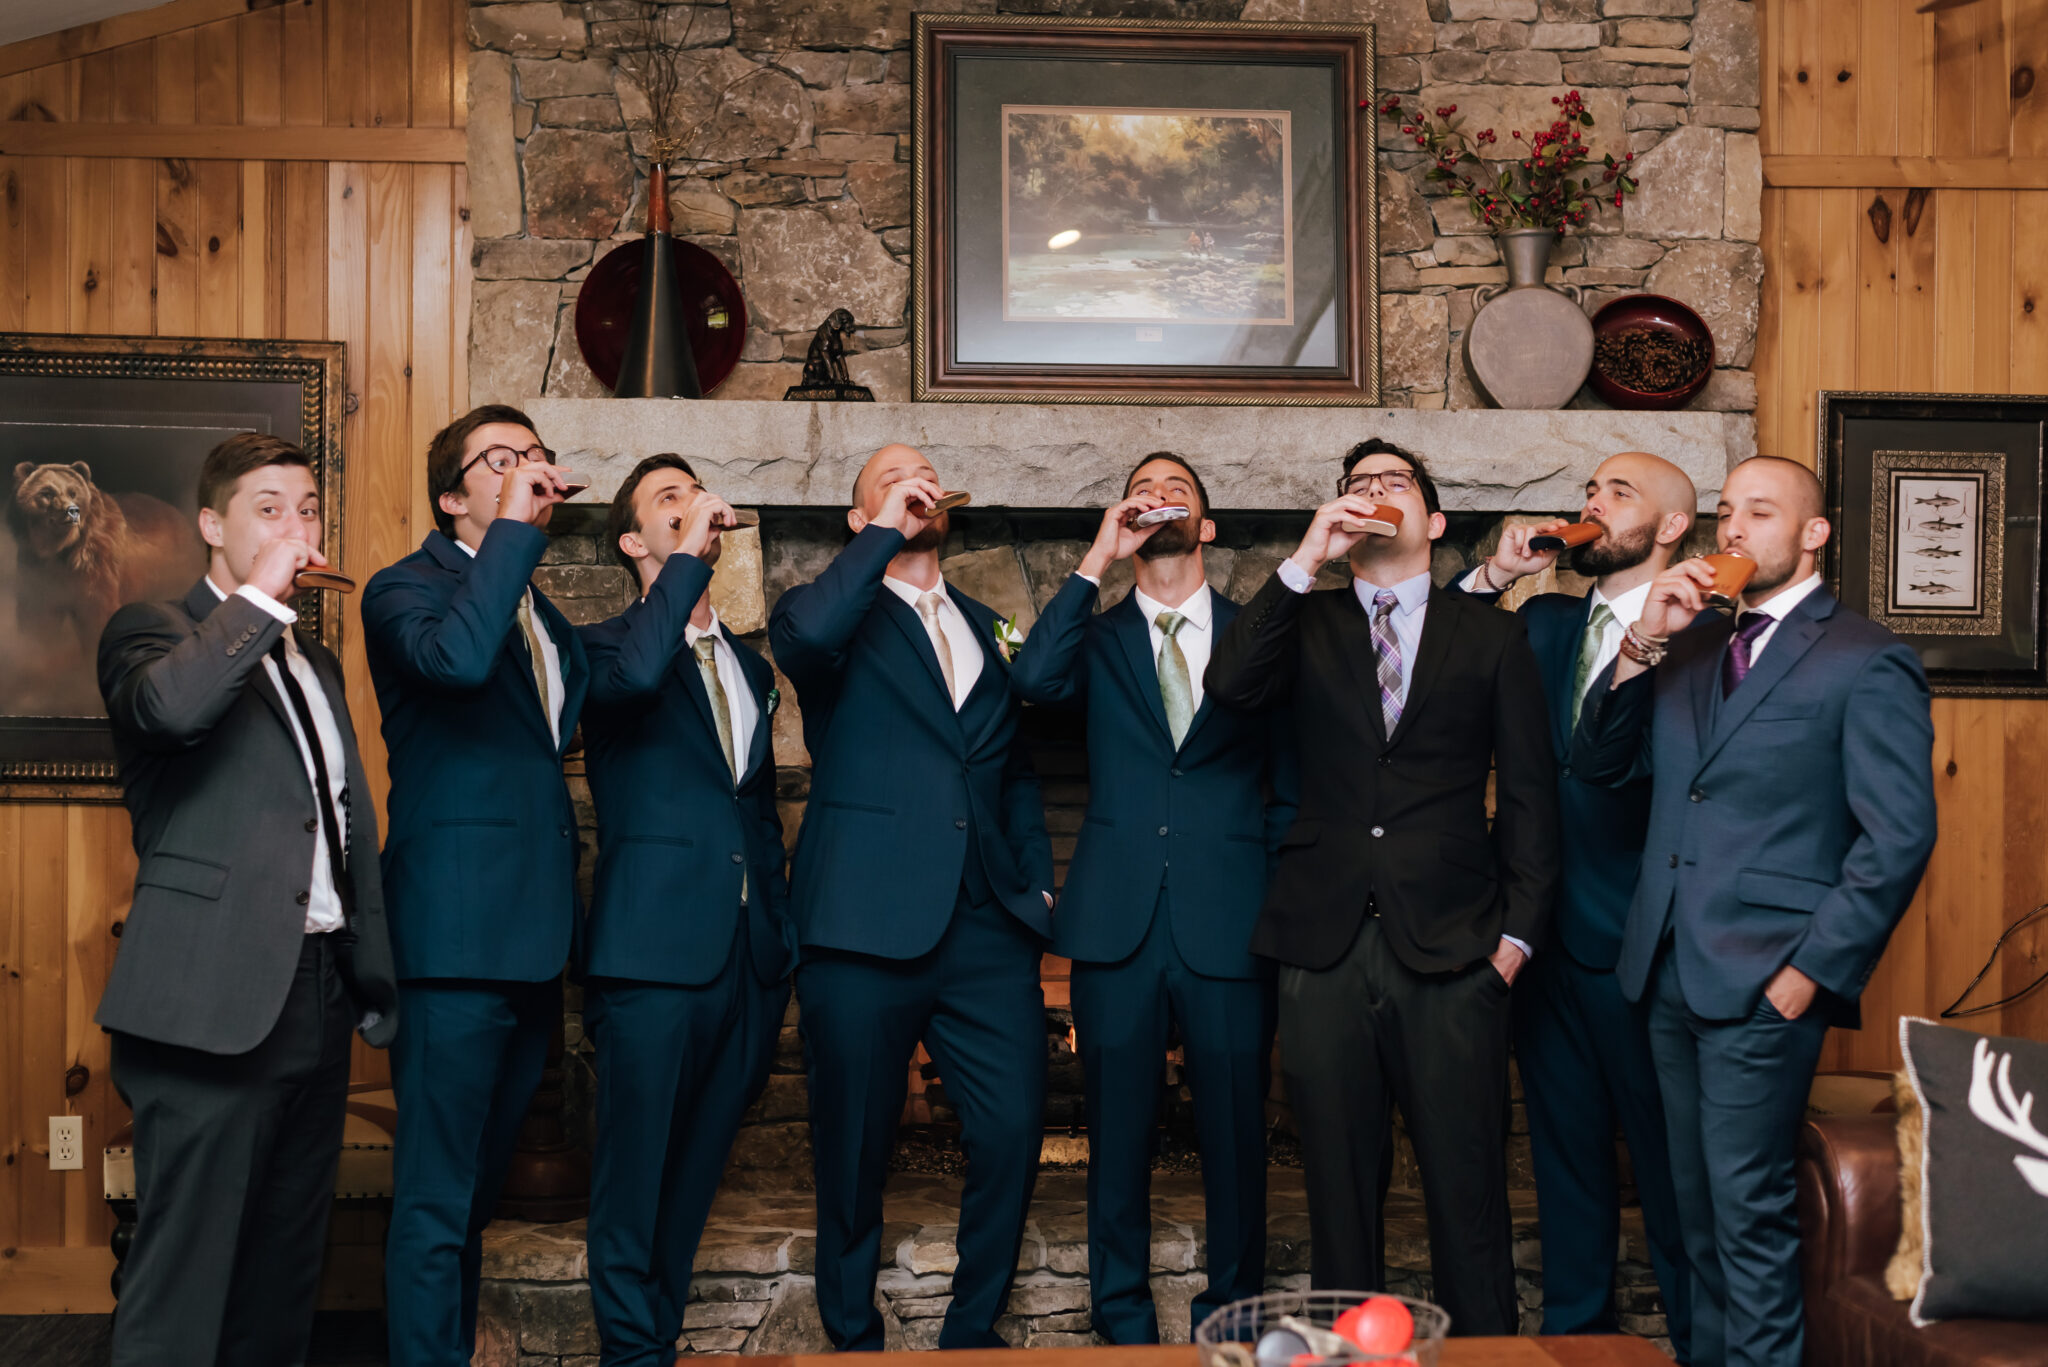 Groomsmen take a drink from their flasks